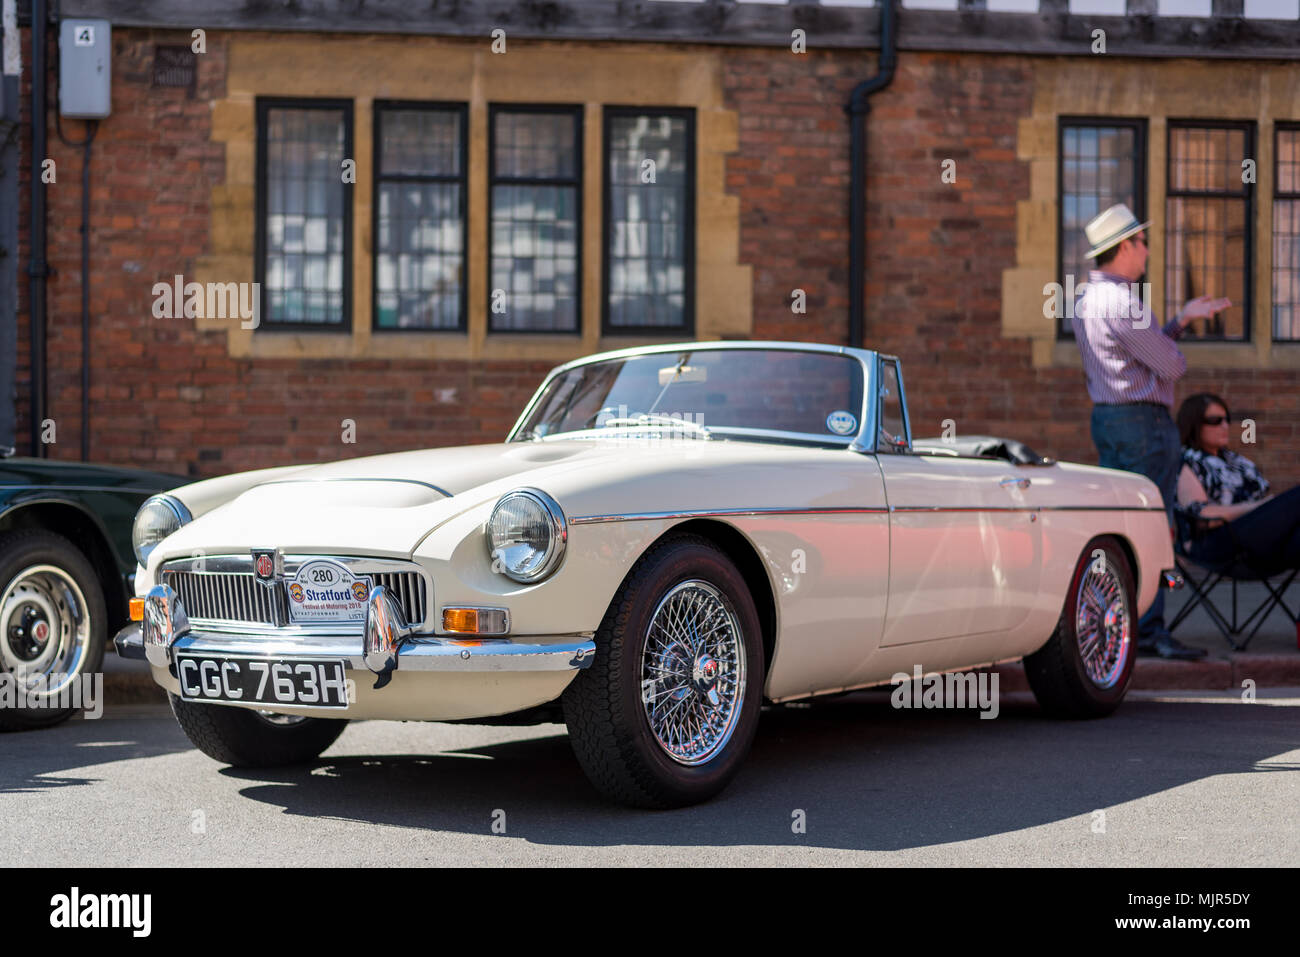 Stratford on Avon, UK, 6 May 2018. Rare, Impressive and Classic Cars on public display  of all ages on public display in the town centre streets of Stratford on Avon, Warwickshire for the 6th & 7th May 2018 Bank Holiday's Stratford Festival of Motoring. Credit: 79Photography/Alamy Live News Stock Photo